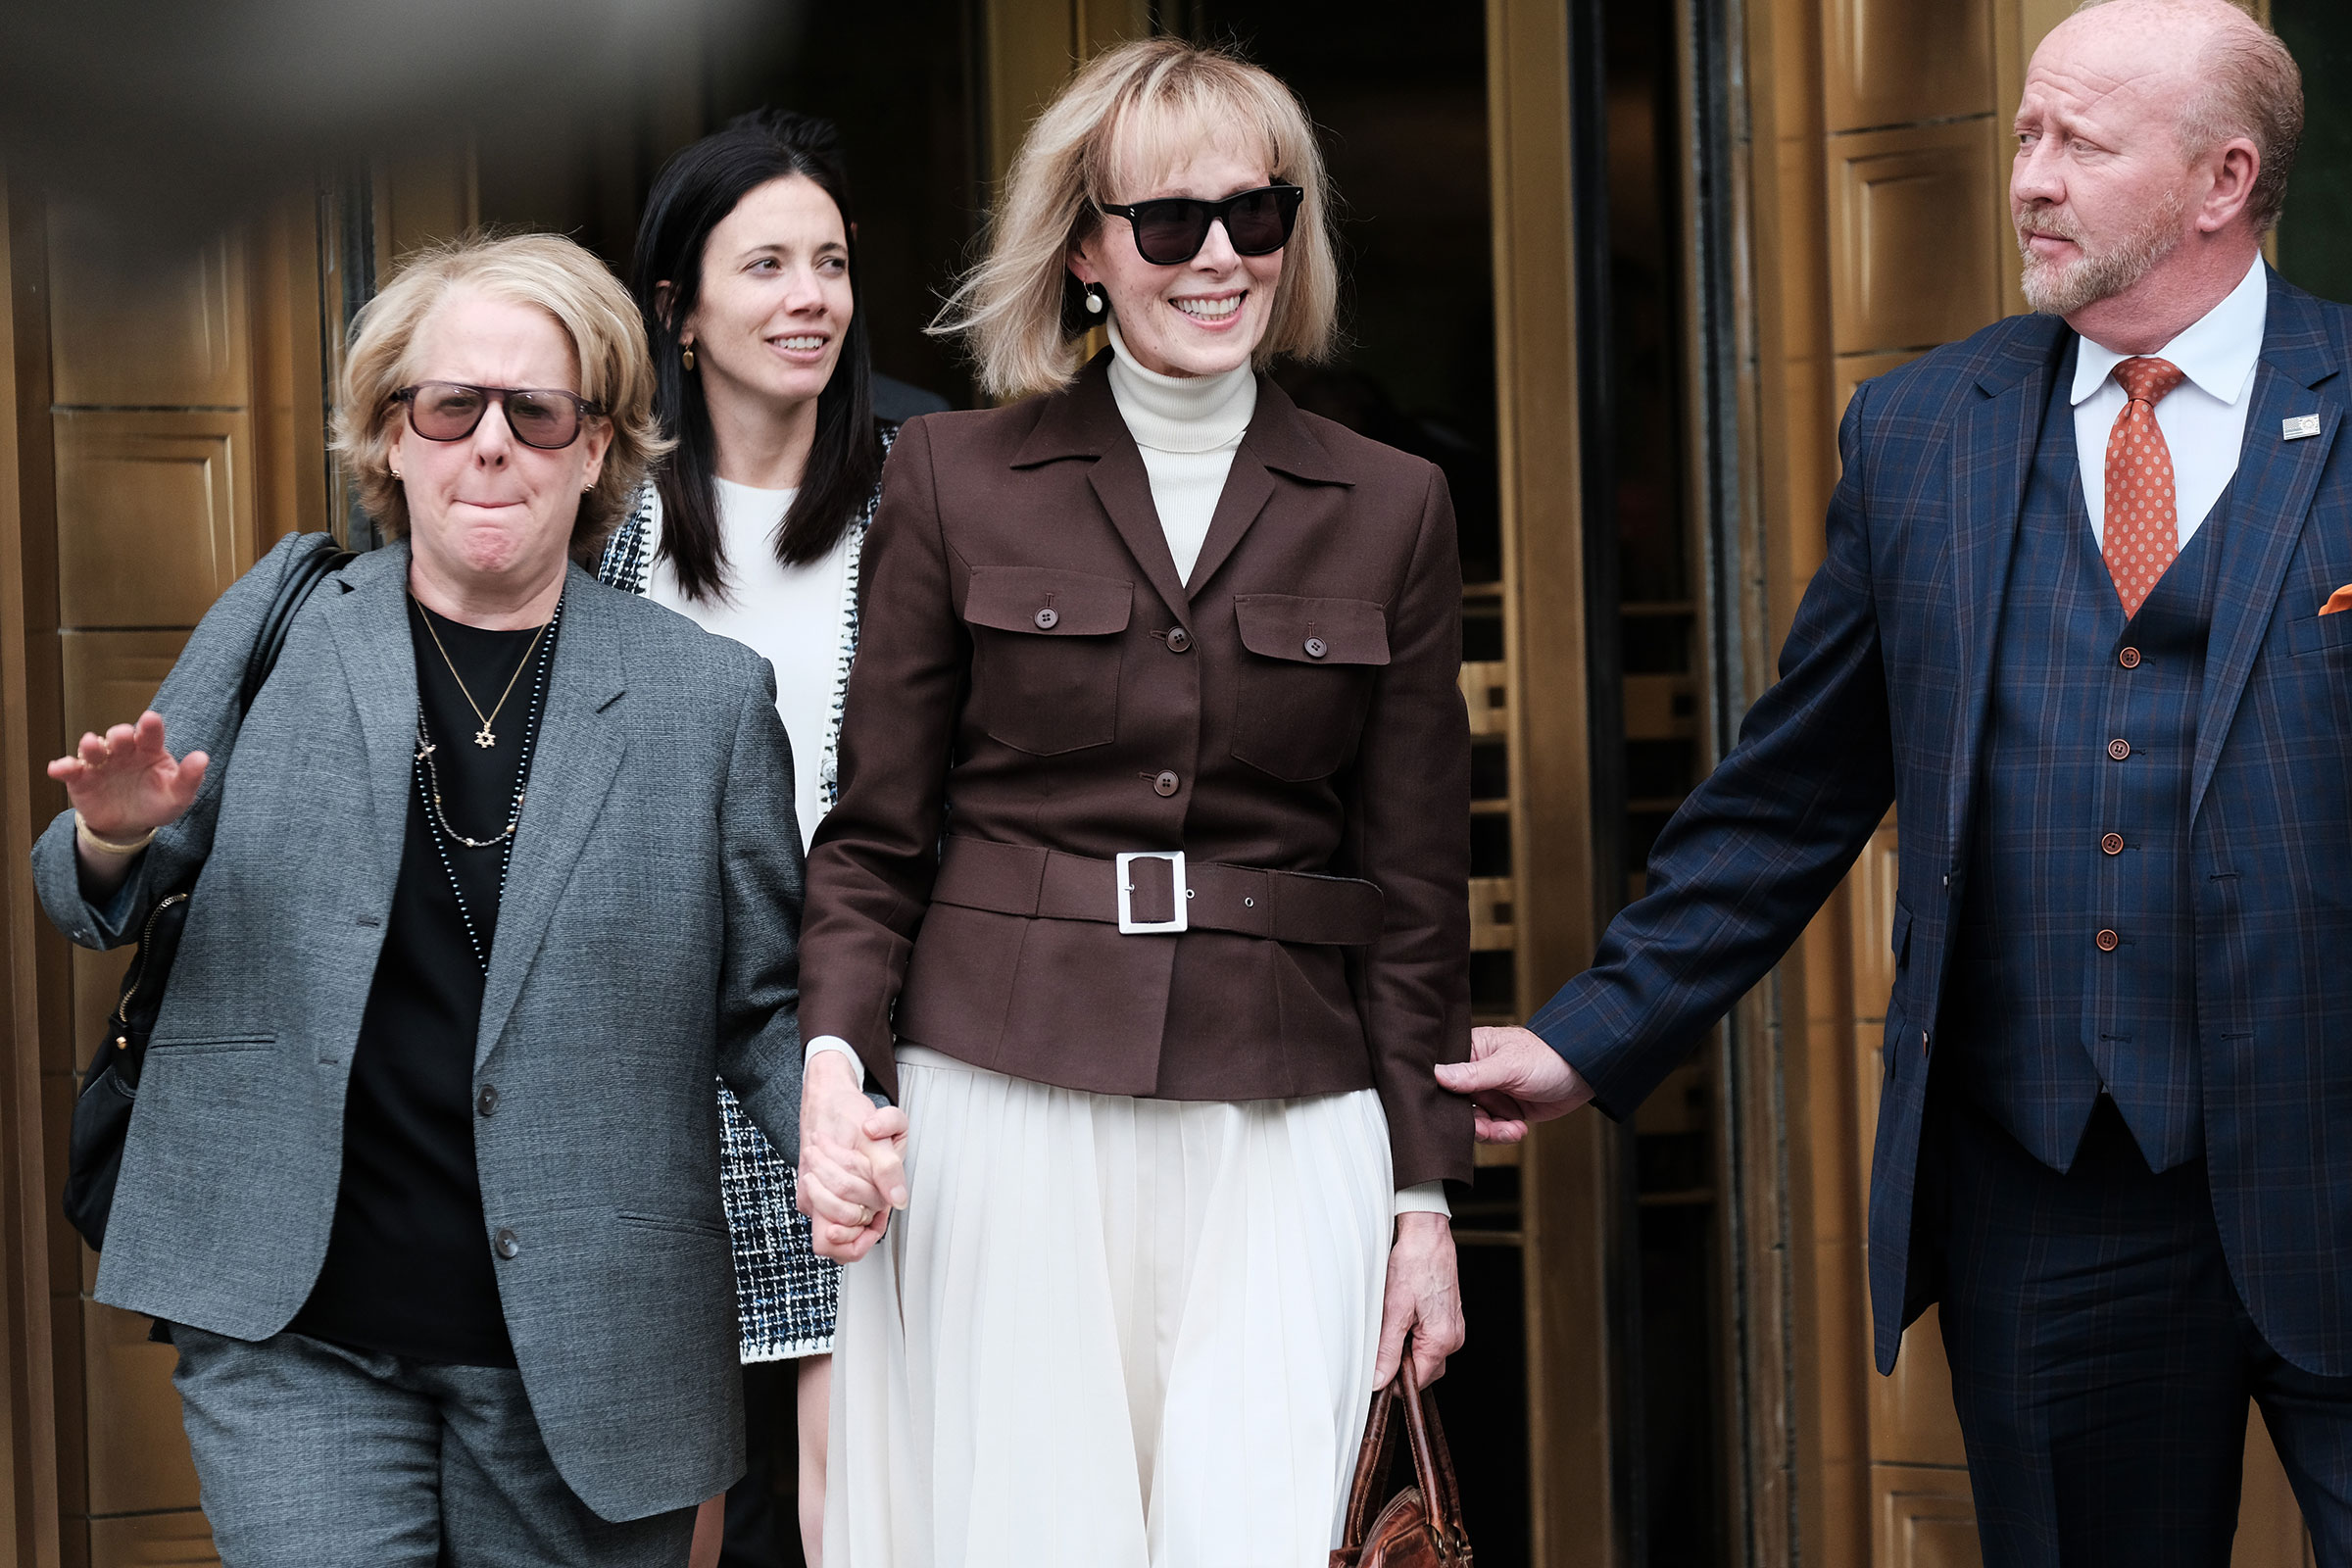 E. Jean Carroll leaves a Manhattan court house after a jury found former President Donald Trump liable for sexually abusing her in a Manhattan department store in the 1990's on May 9 in New York City.